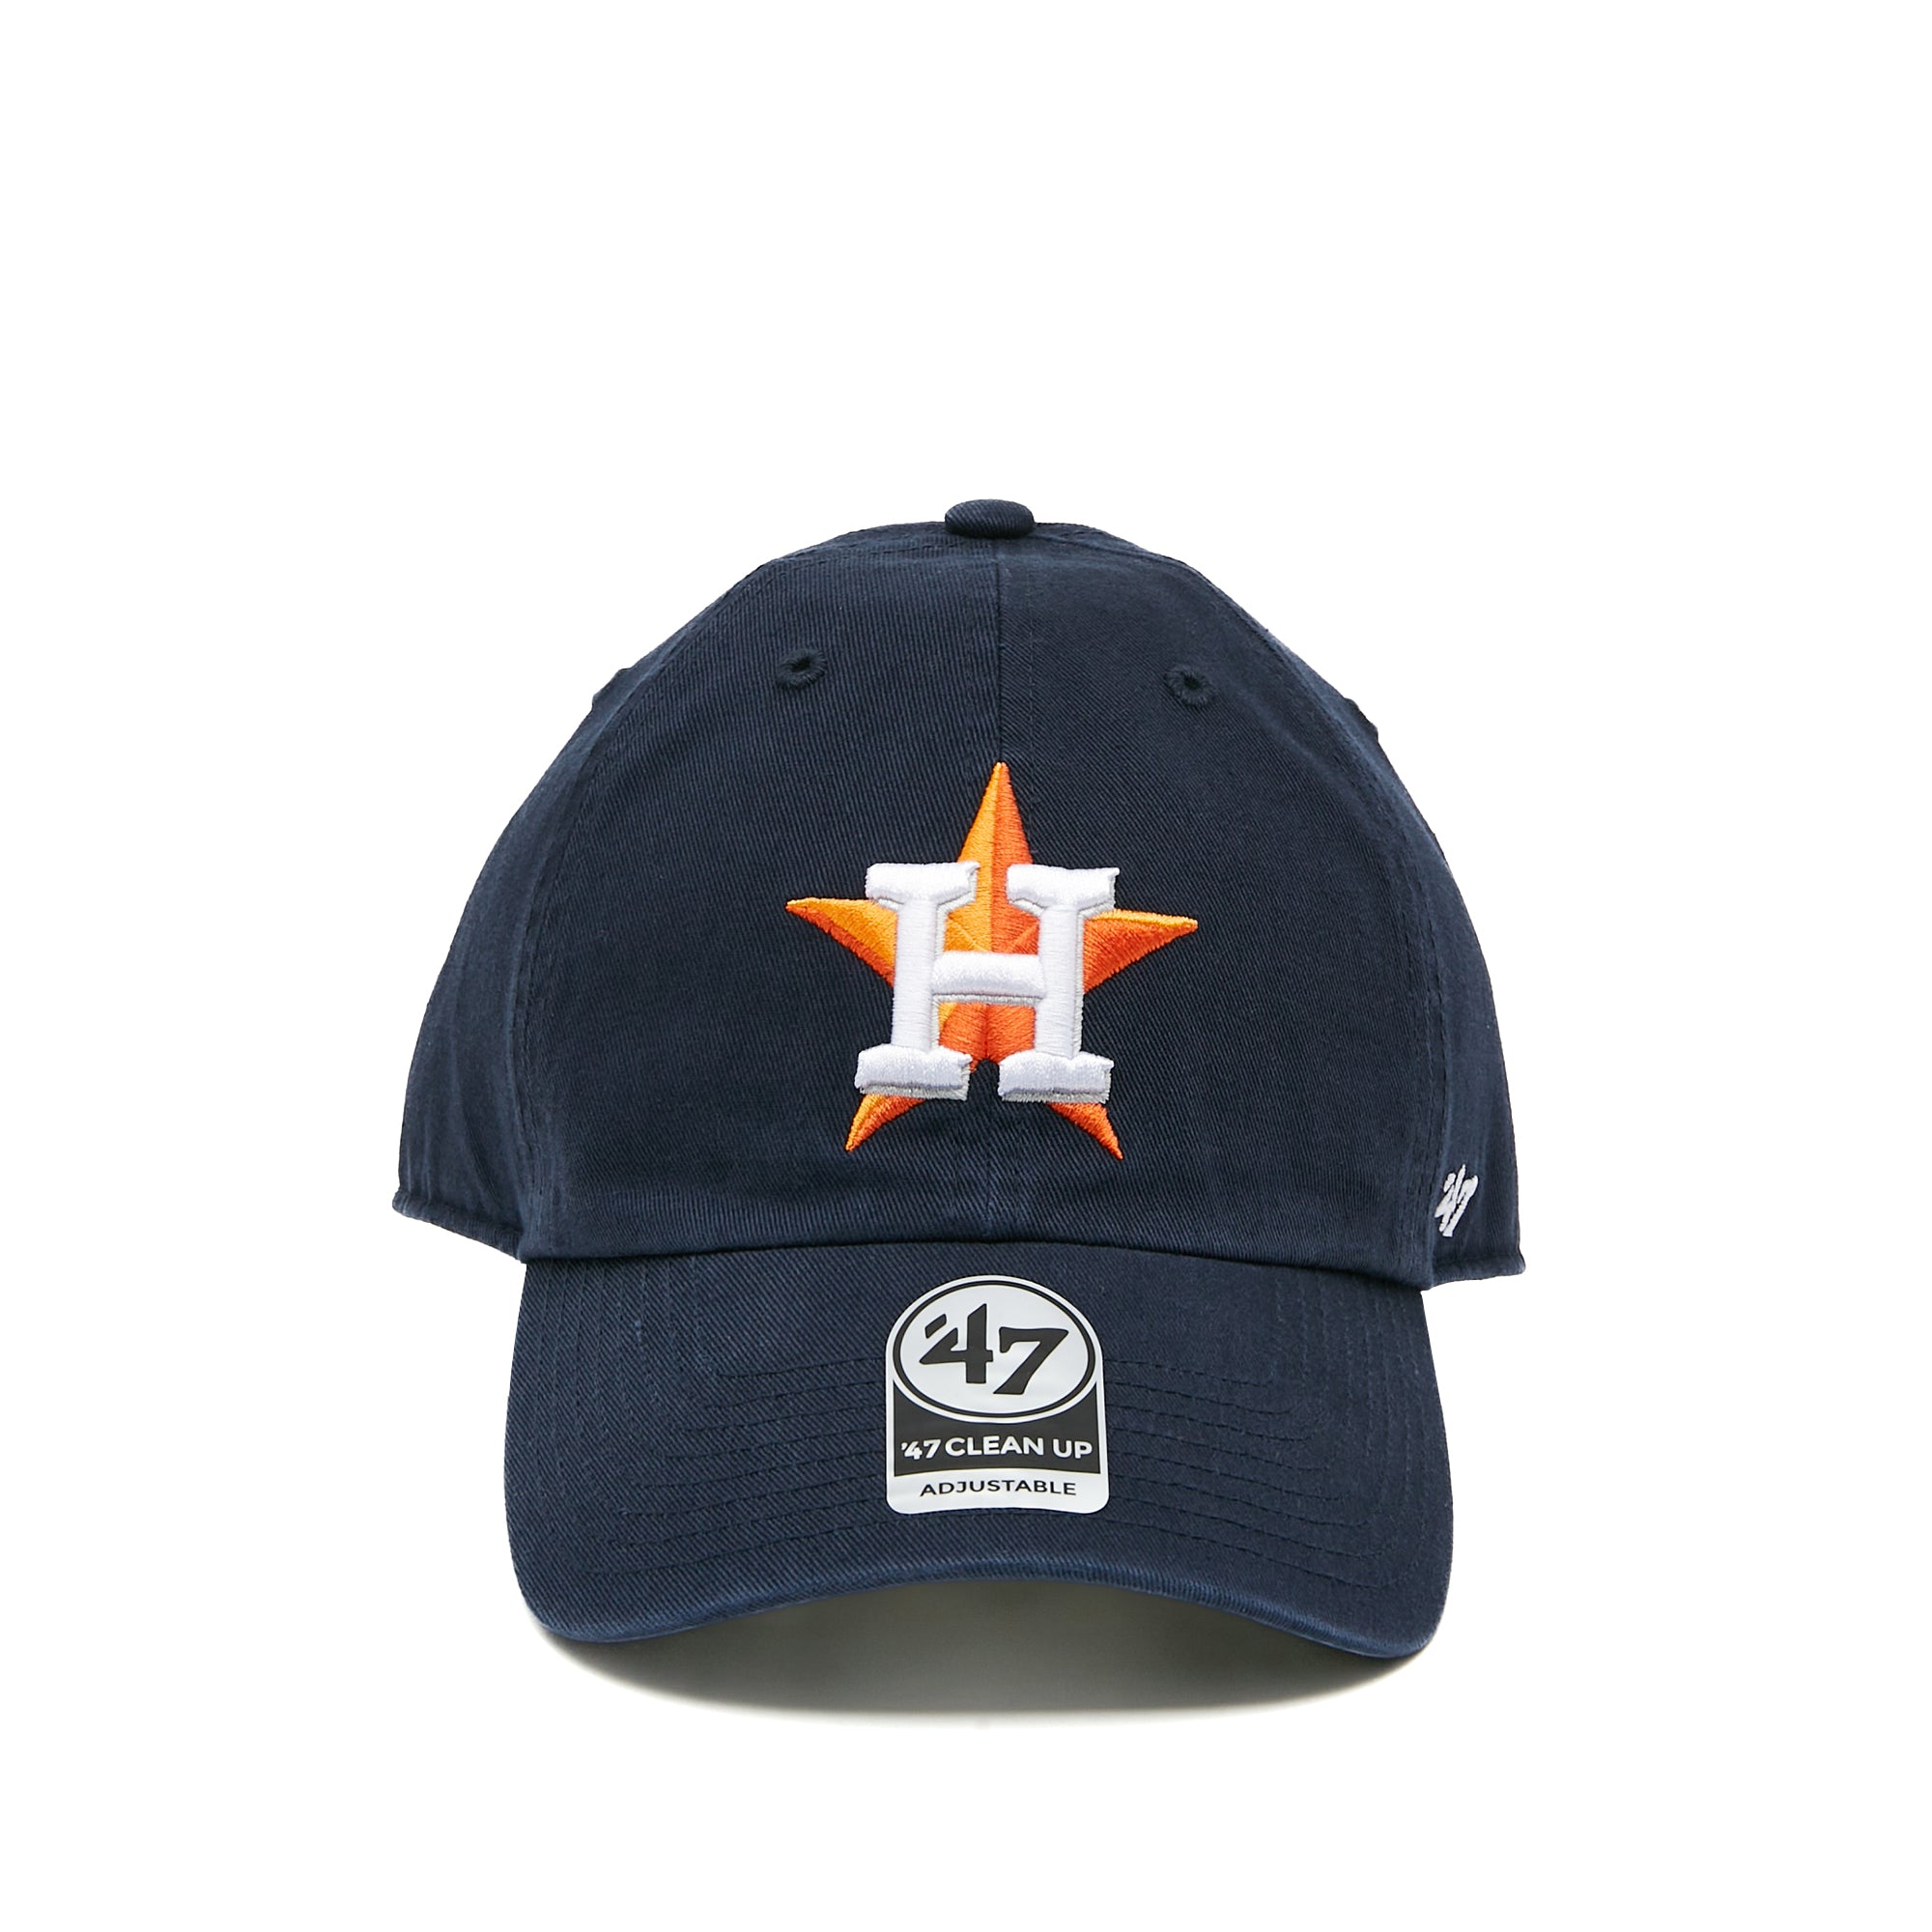 MLB Houston Astros '47 Clean Up Cap Navy One Size